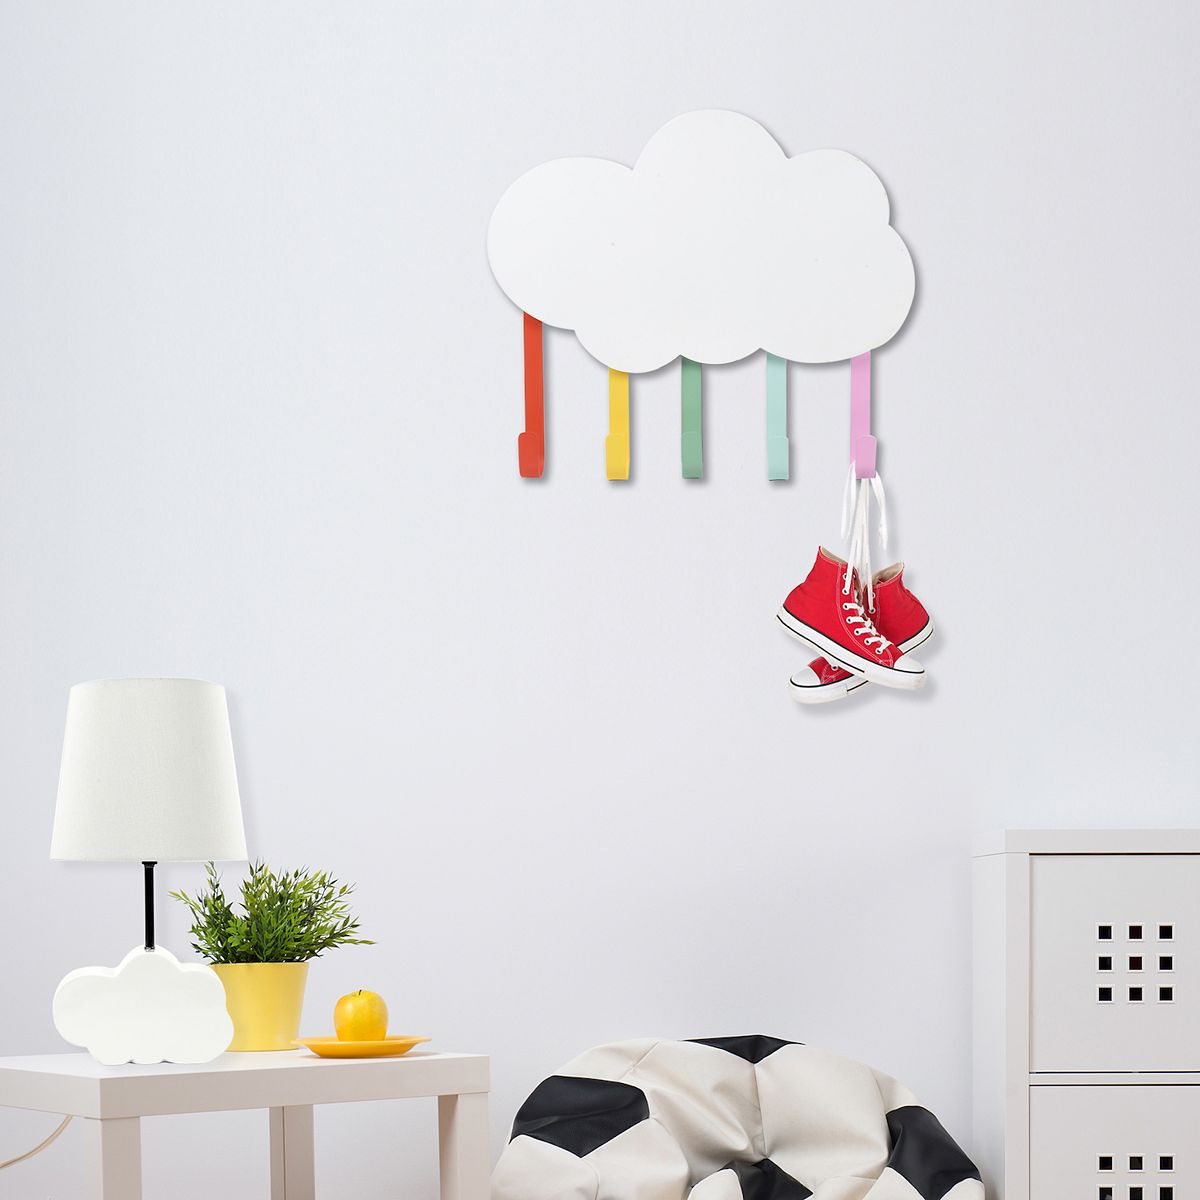 Kids Wall Hooks: Add Functional Wall Decor to Your Child's Room